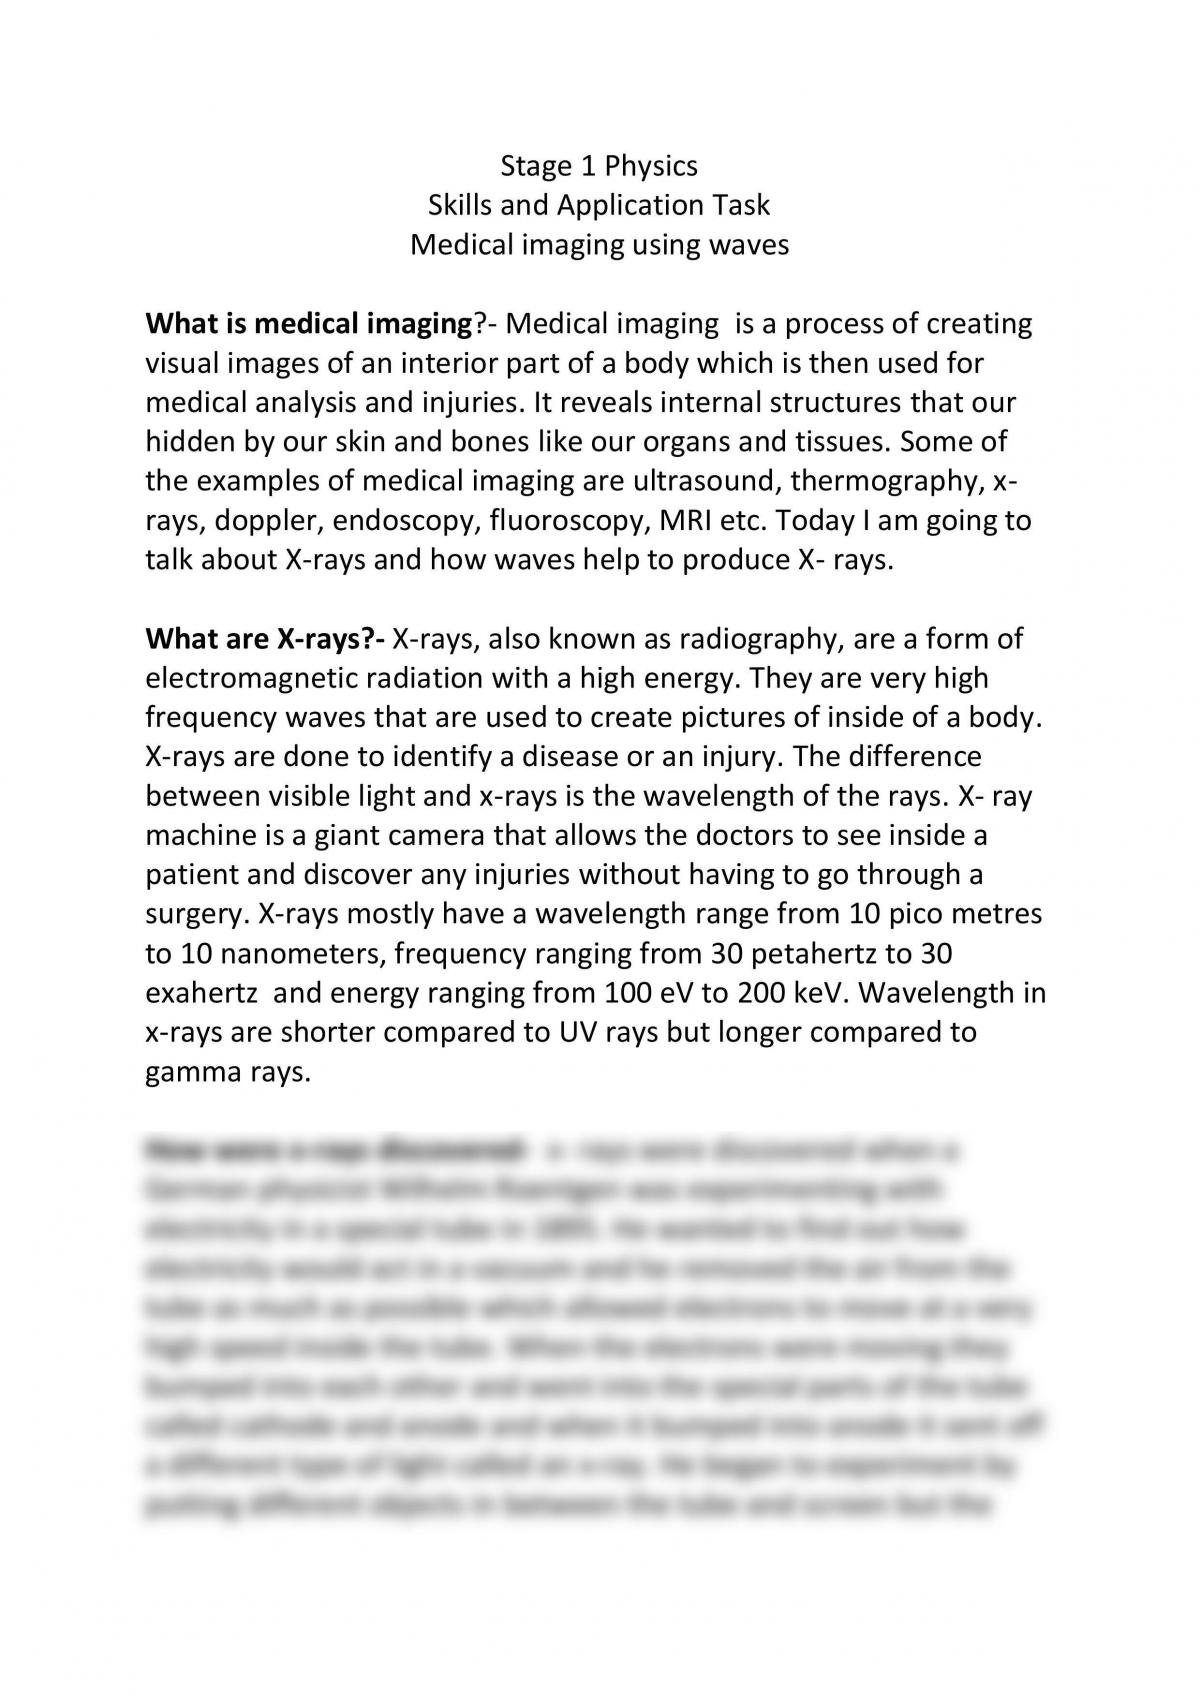 Medical Imaging of Waves - Page 1